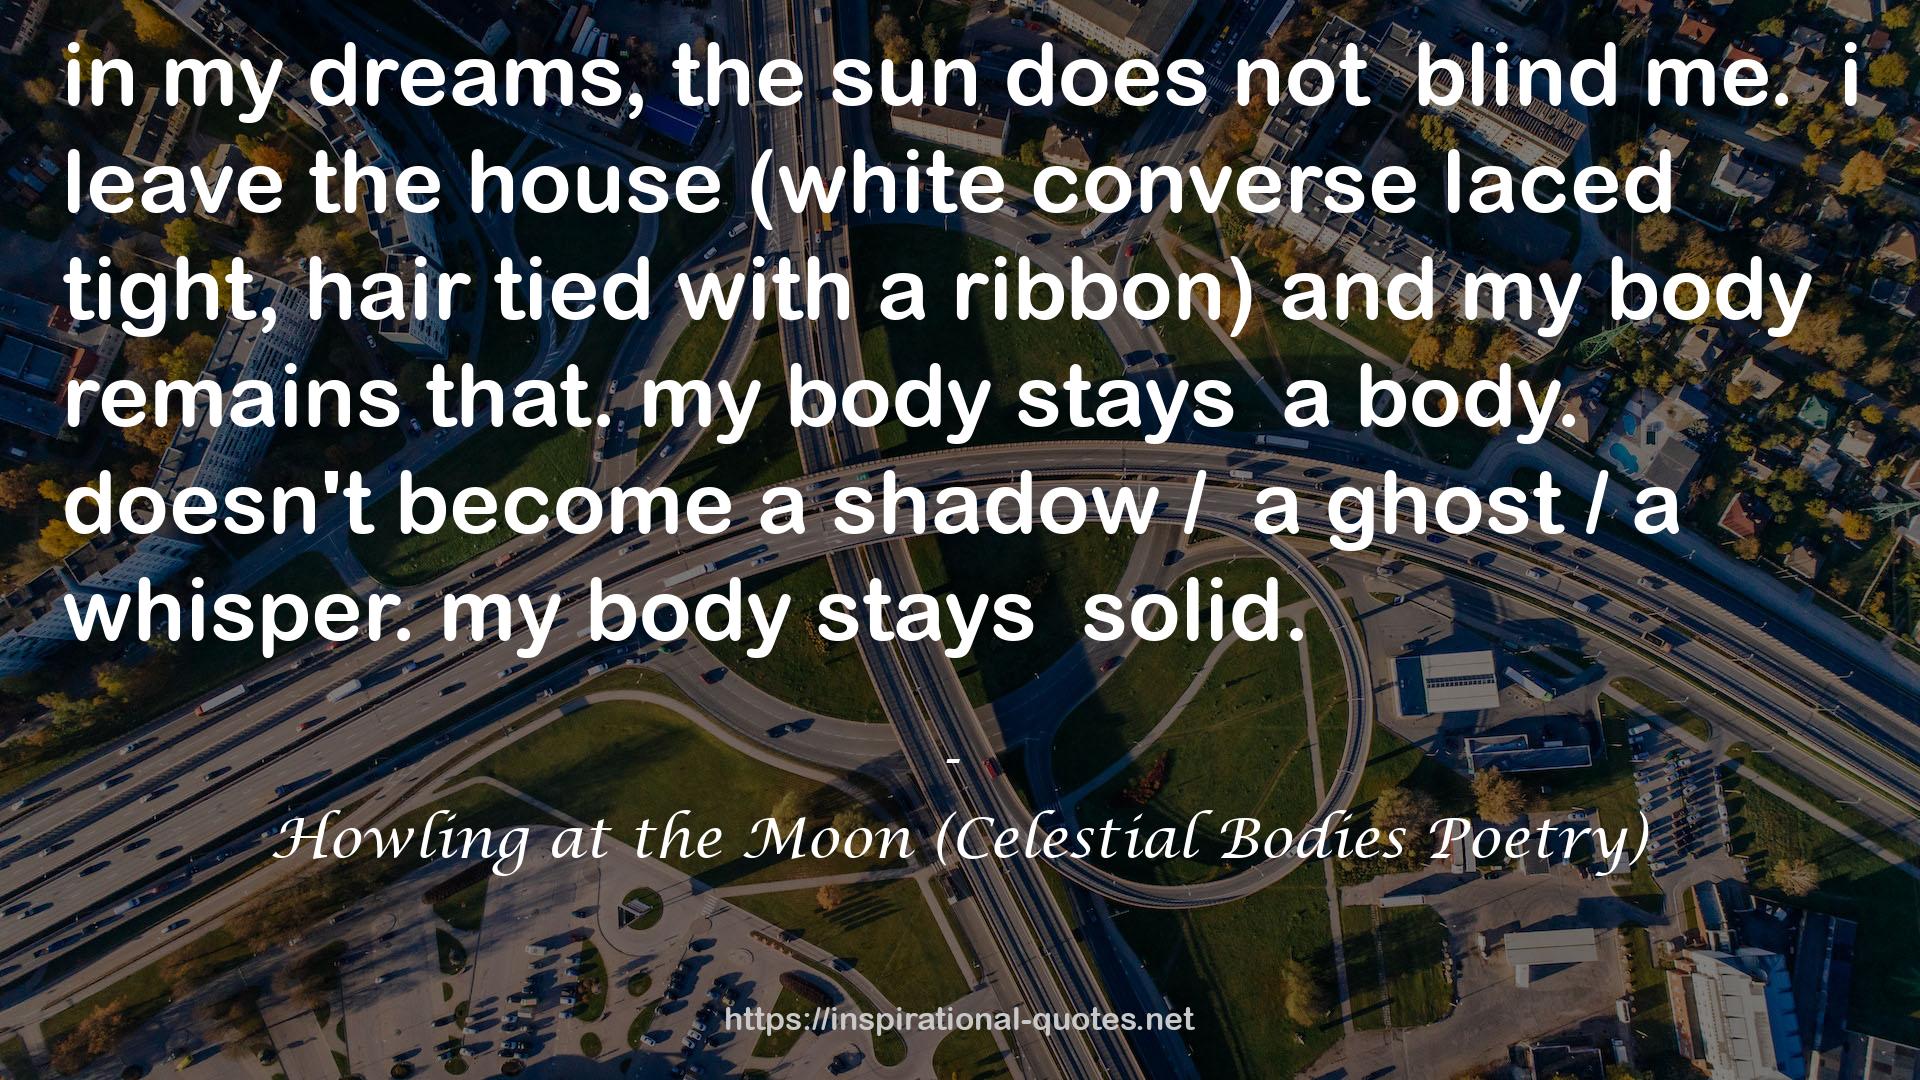 Howling at the Moon (Celestial Bodies Poetry) QUOTES